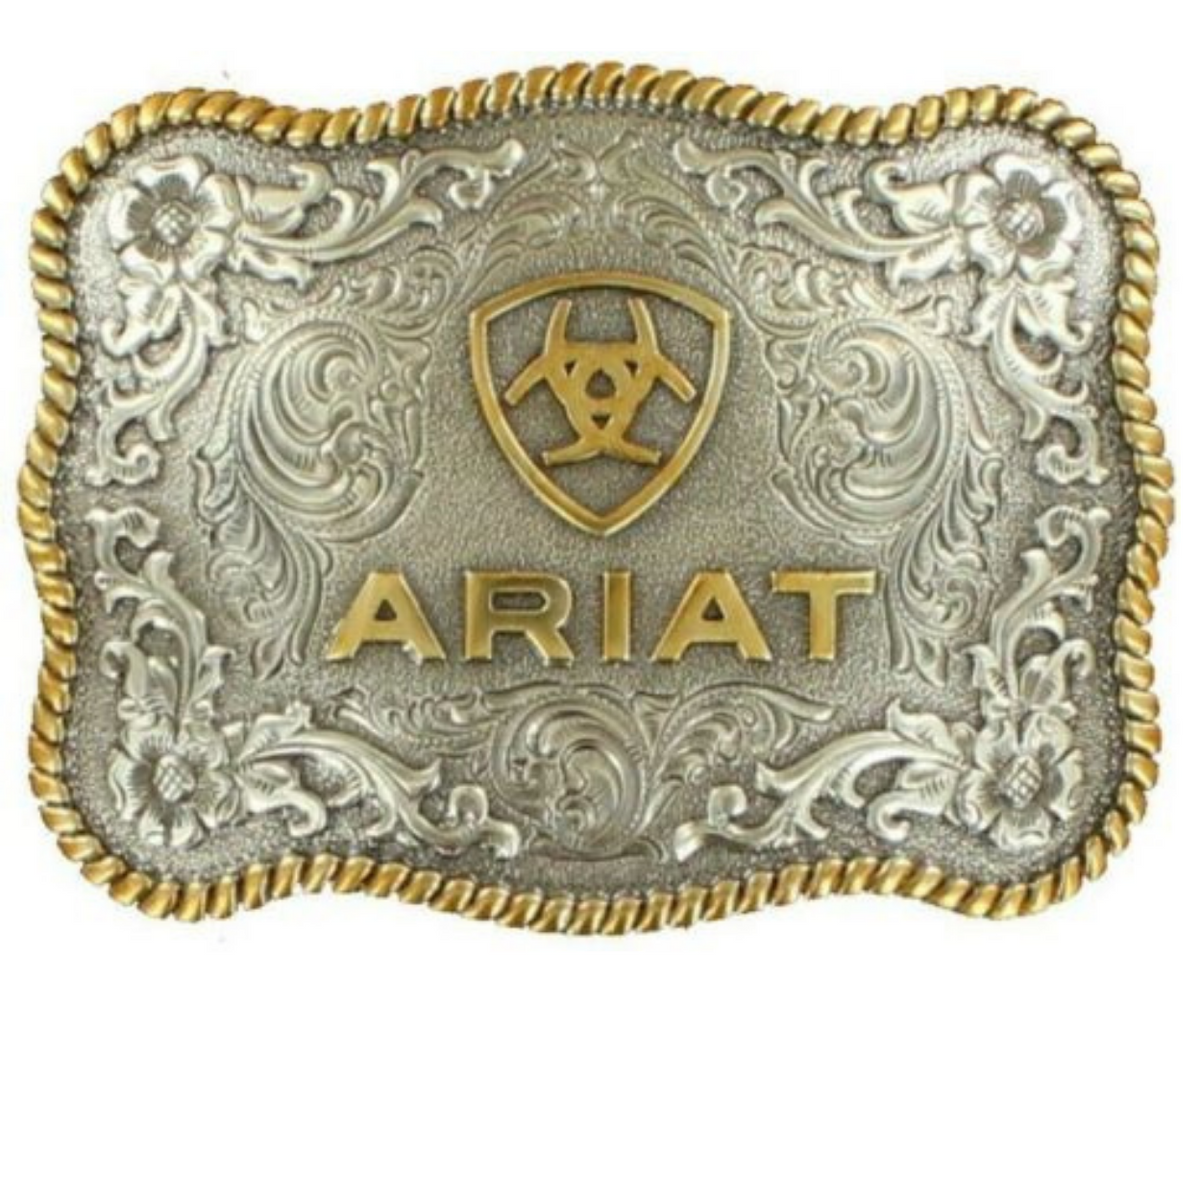 Ariat Antique Silver and Gold Rectangle Belt Buckle